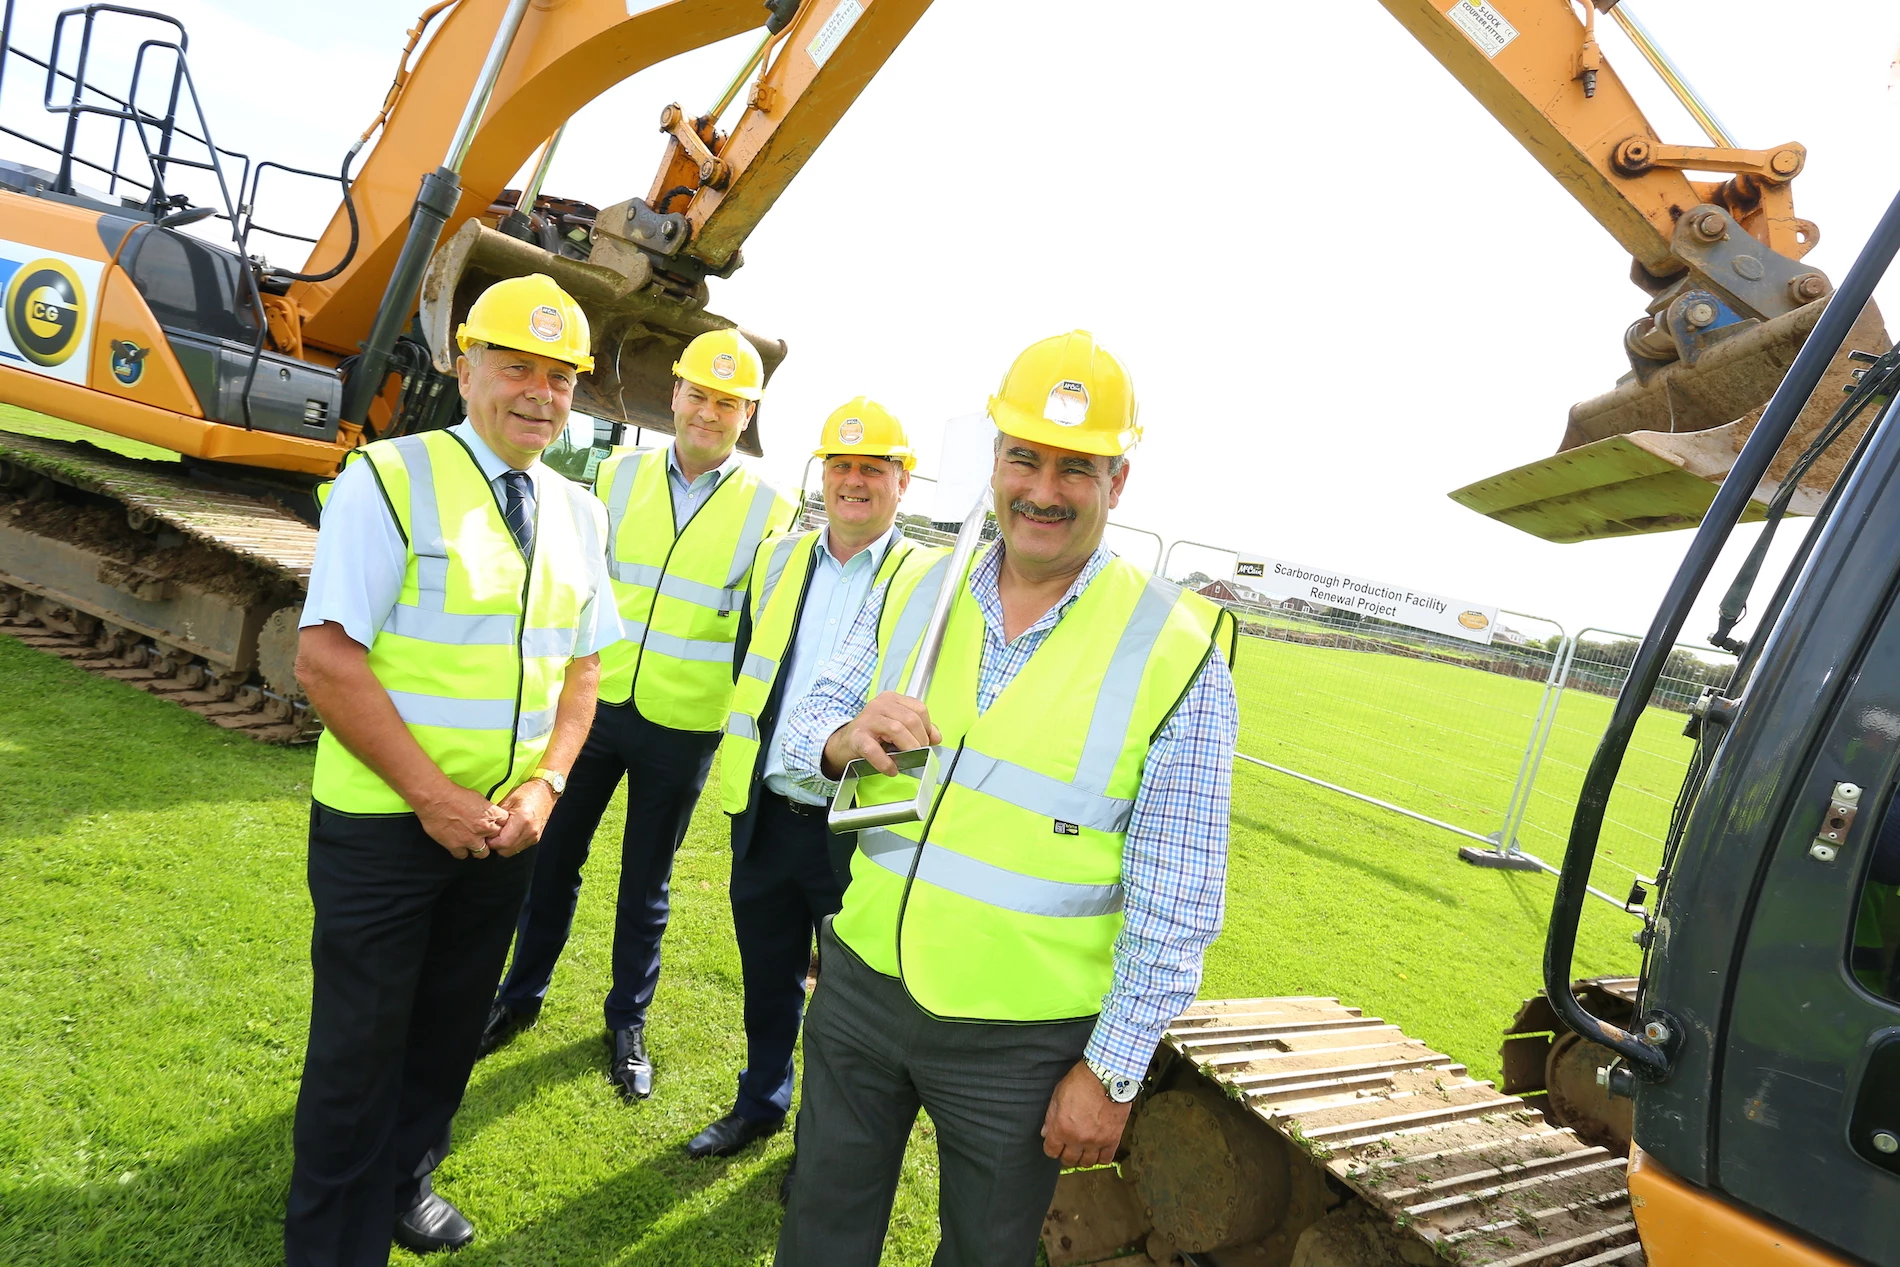 McCain Foods marked the milestone with a ground breaking ceremony at the Eastfield site.